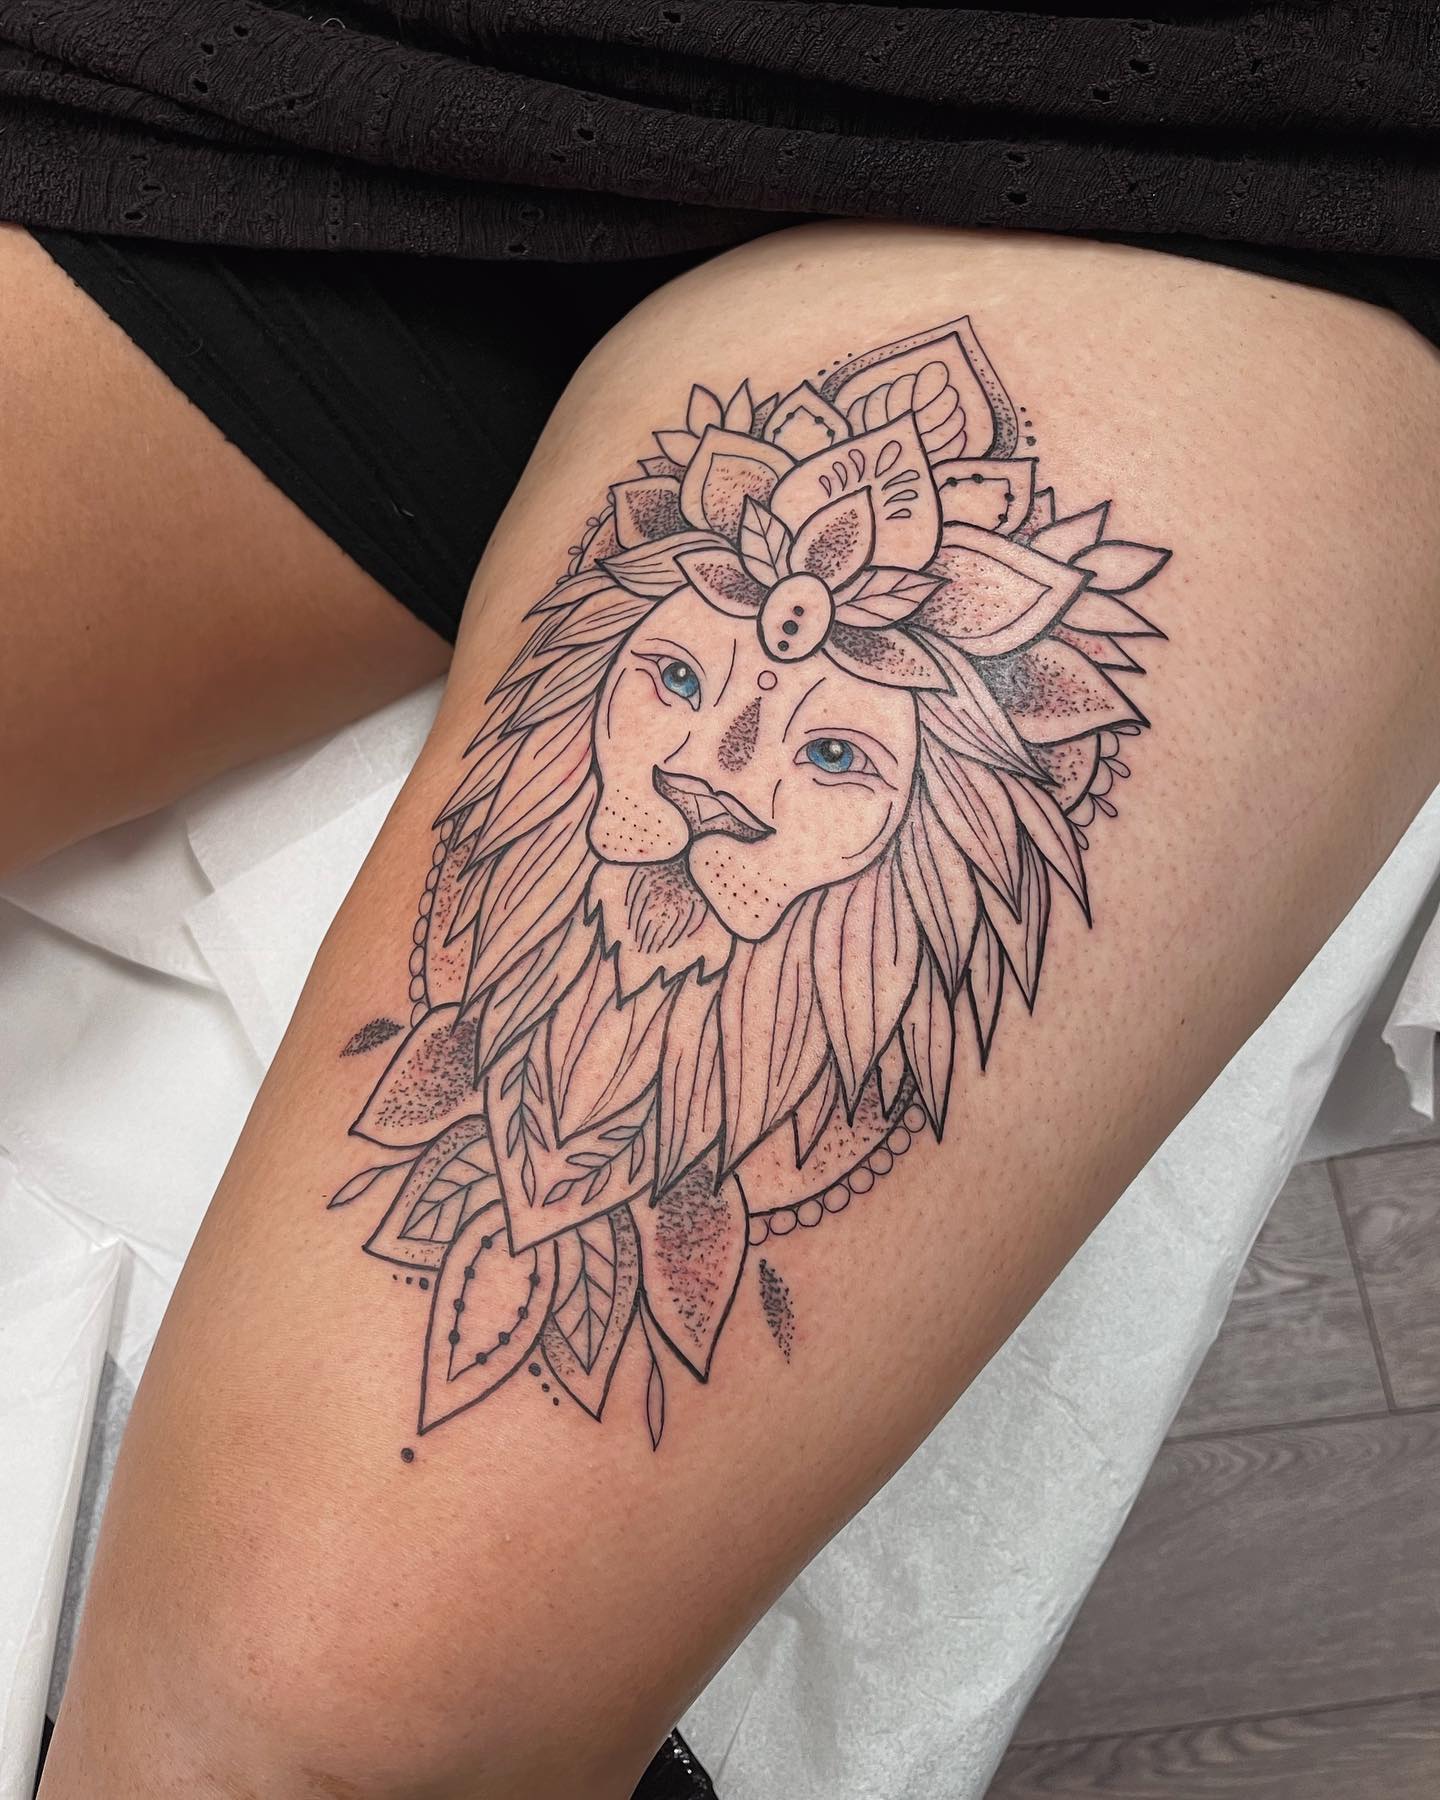 Get an isometrically designed lion tattoo and turn your body into a piece of art.